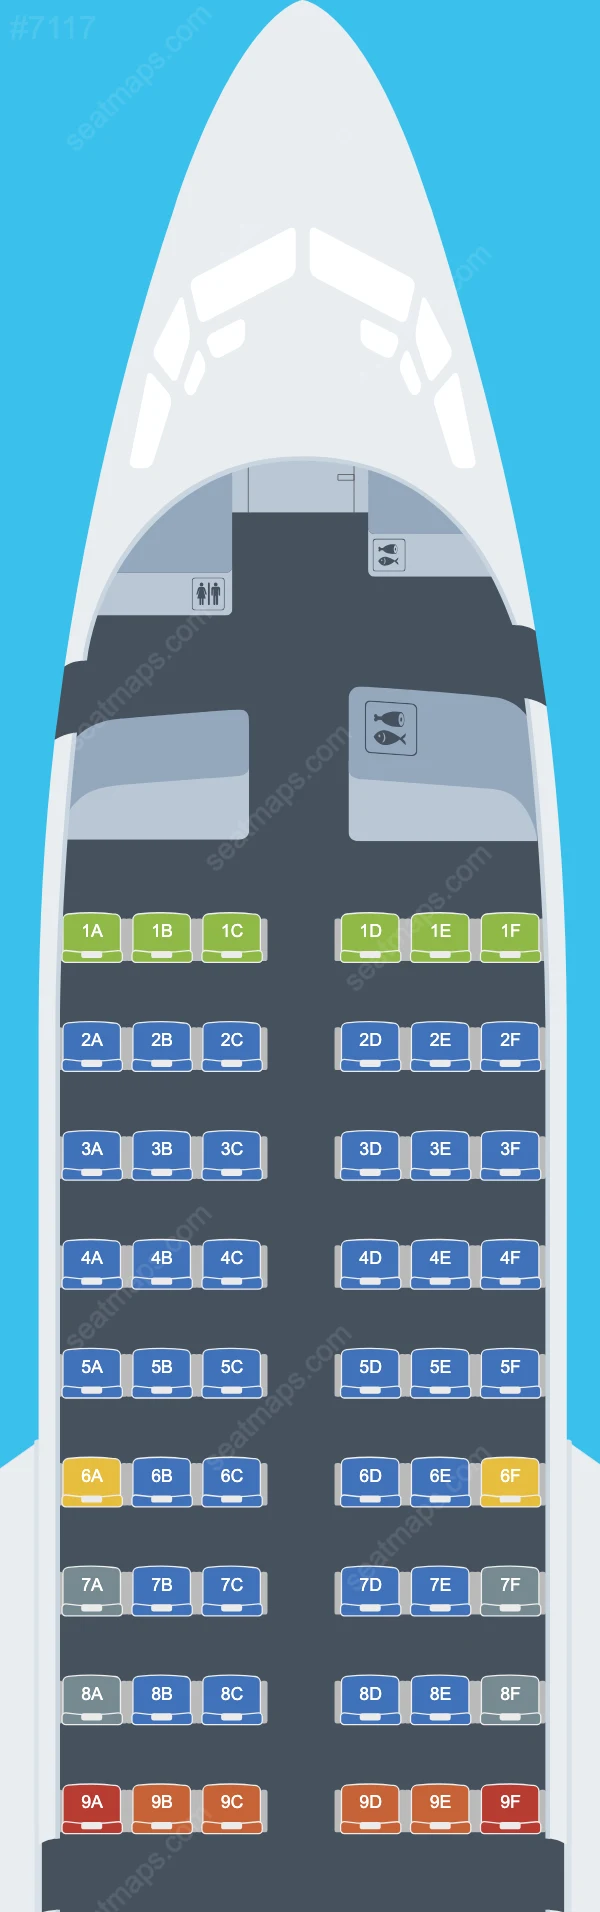 SCAT Airlines Boeing 737 Seat Maps 737-500